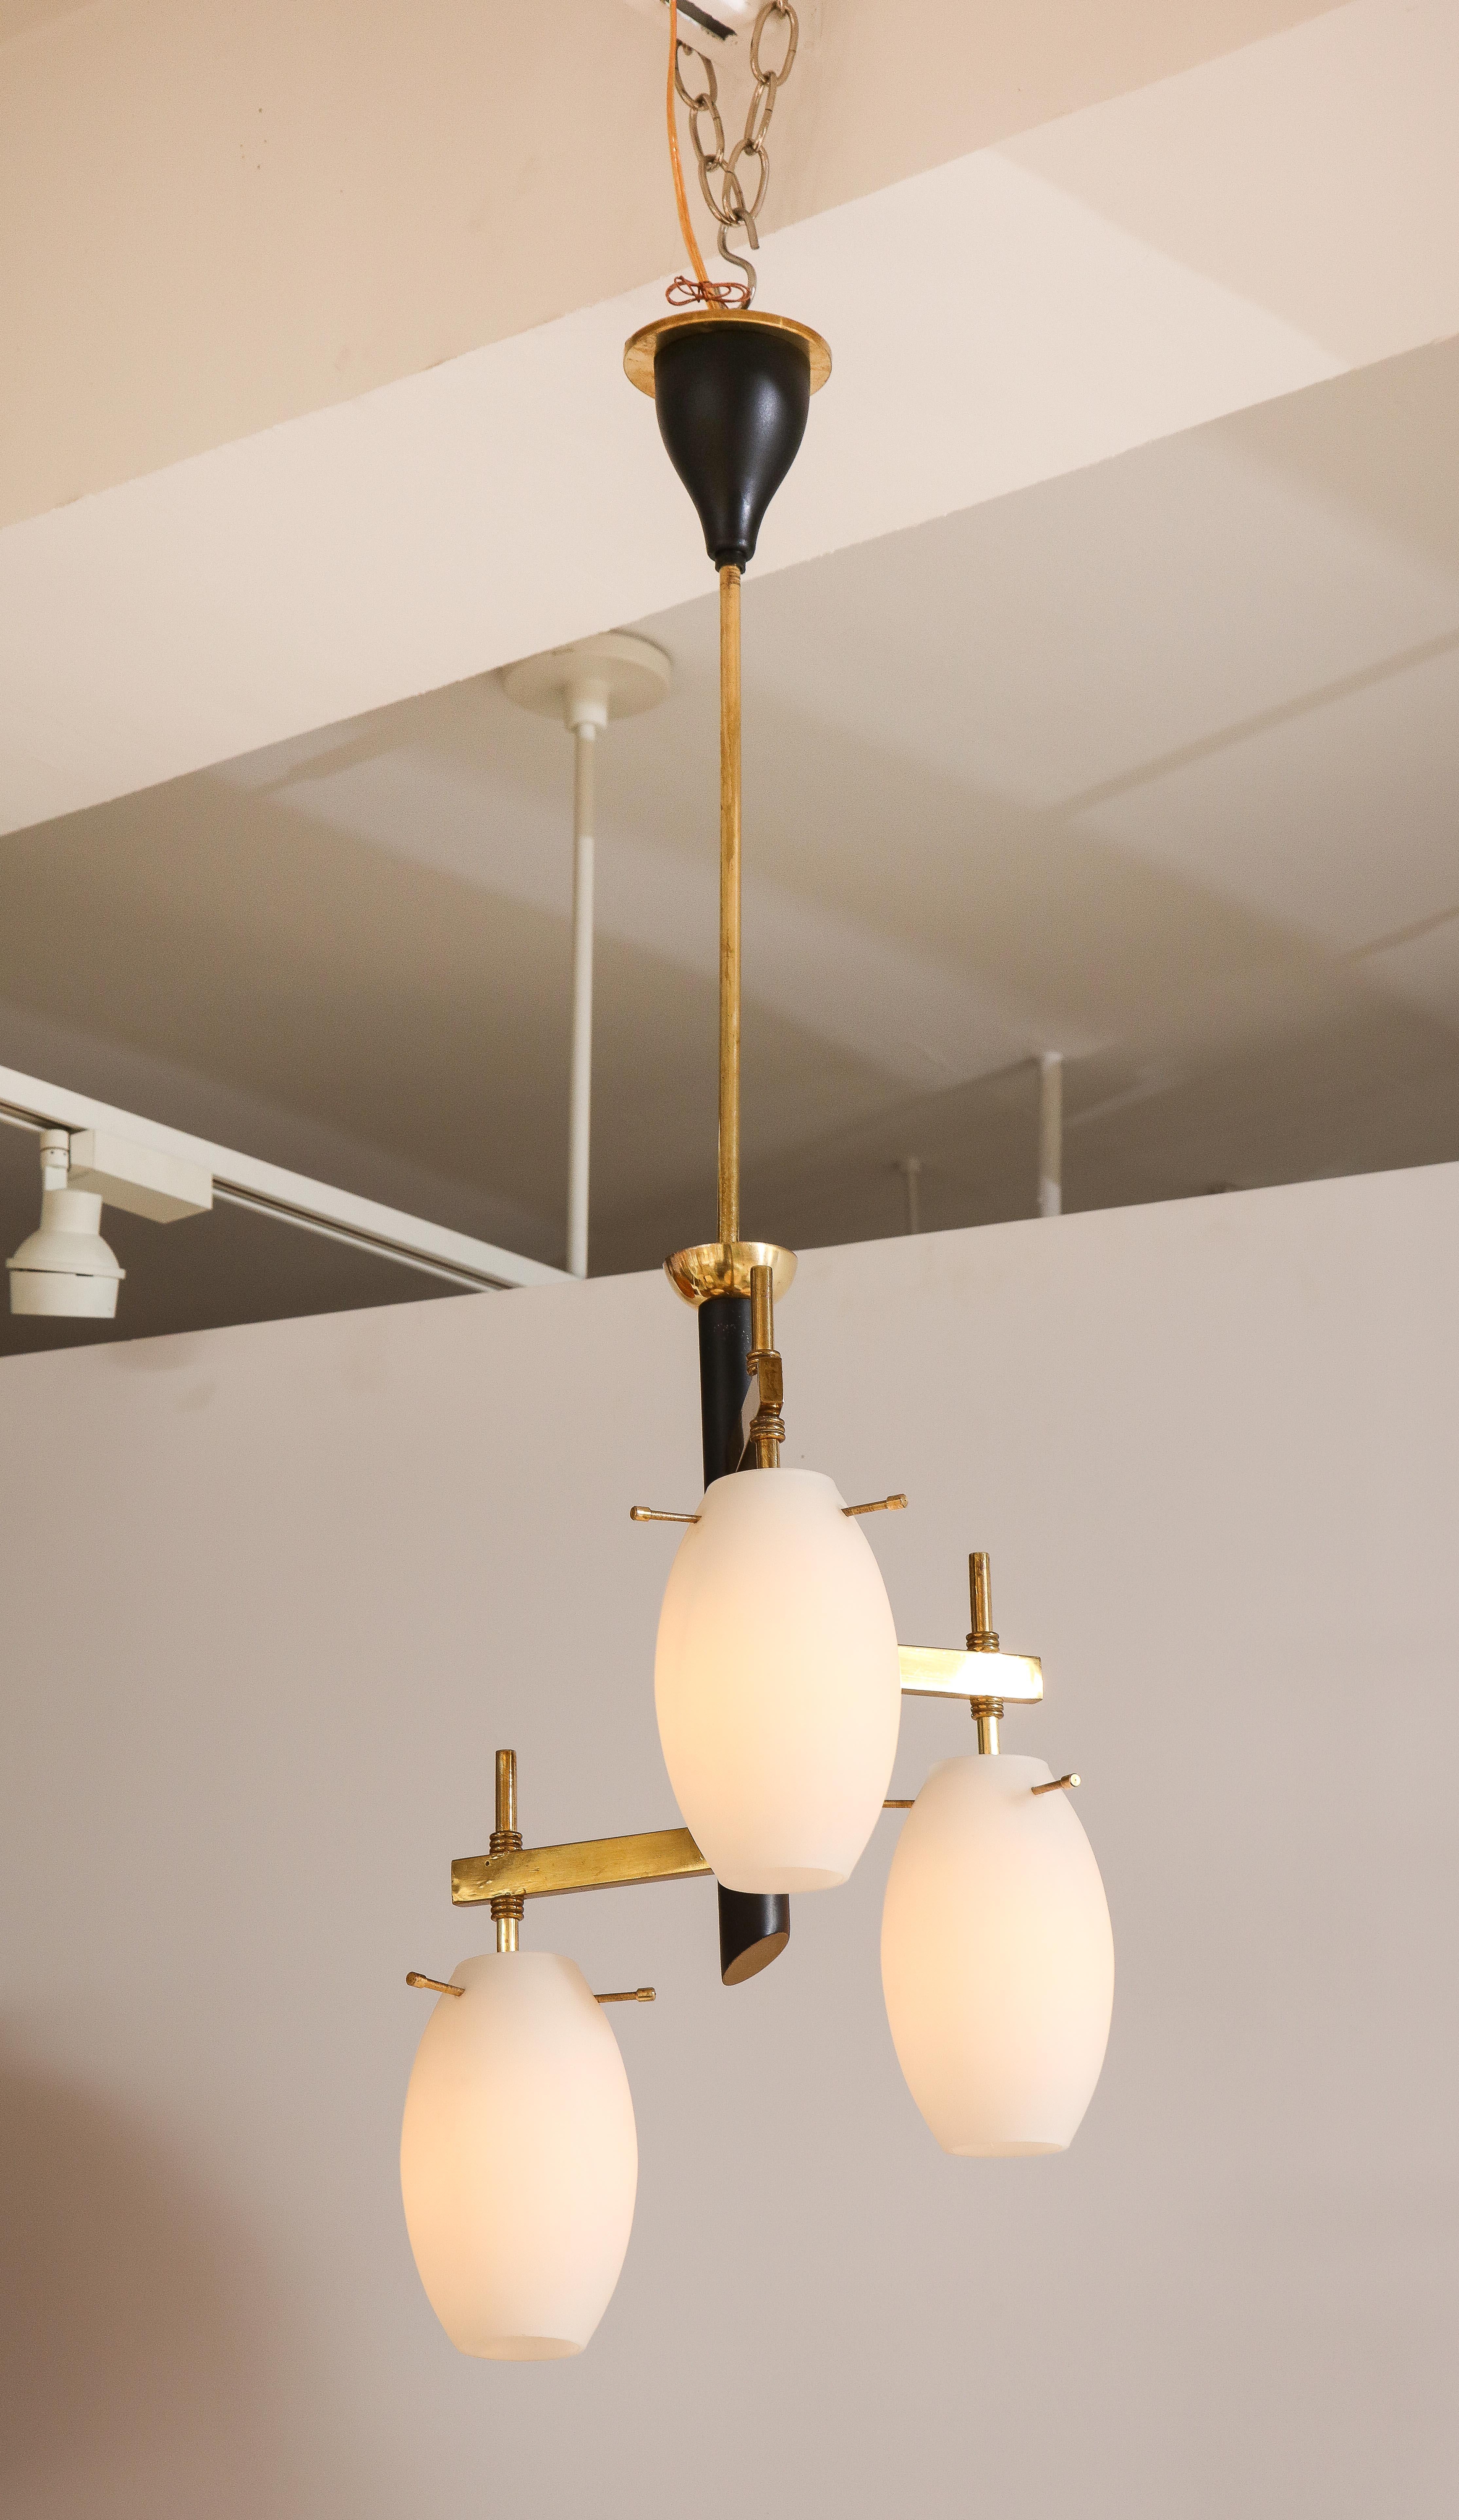 An Italian modernist chandelier with three opaline glass bulbs which extend from brass horizontal supports. The stem in black metal and brass, with its original black metal and brass tulip shaped canopy. Newly rewired for USA standards, uses three